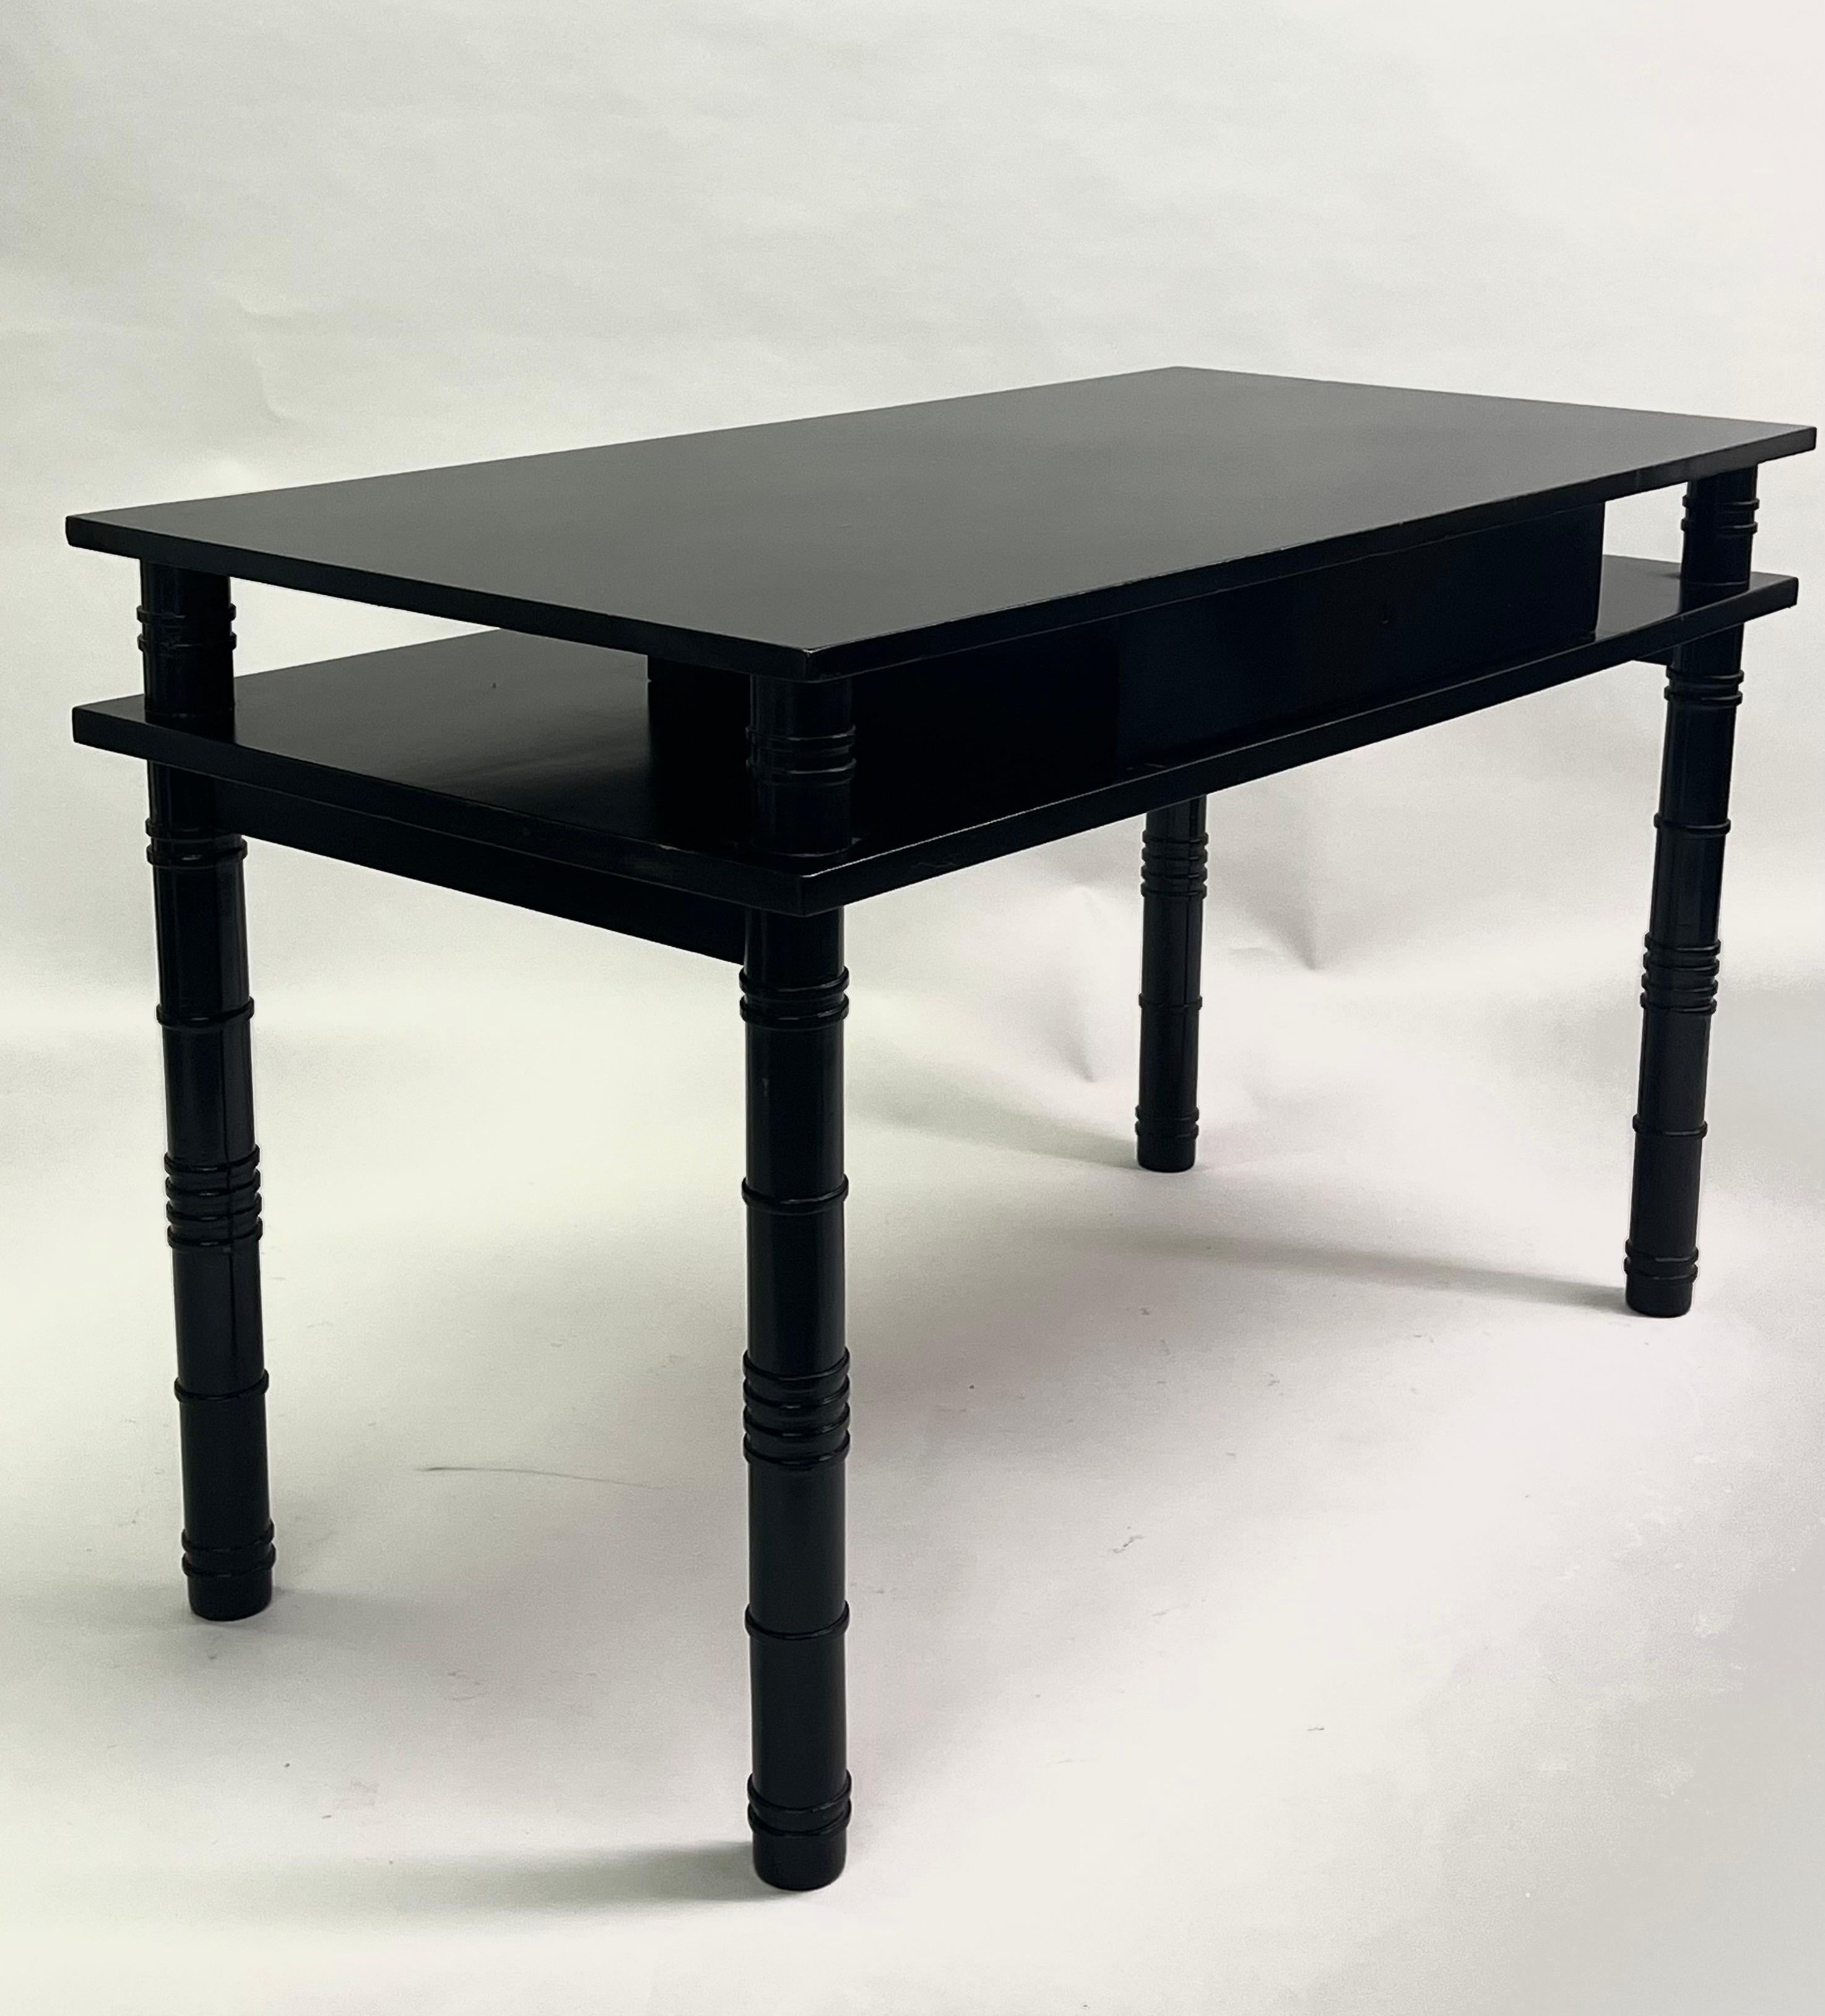 French MidCentury Modern Neoclassical Ebonized Sycamore Desk by Leon Jallot 1936 In Good Condition For Sale In New York, NY